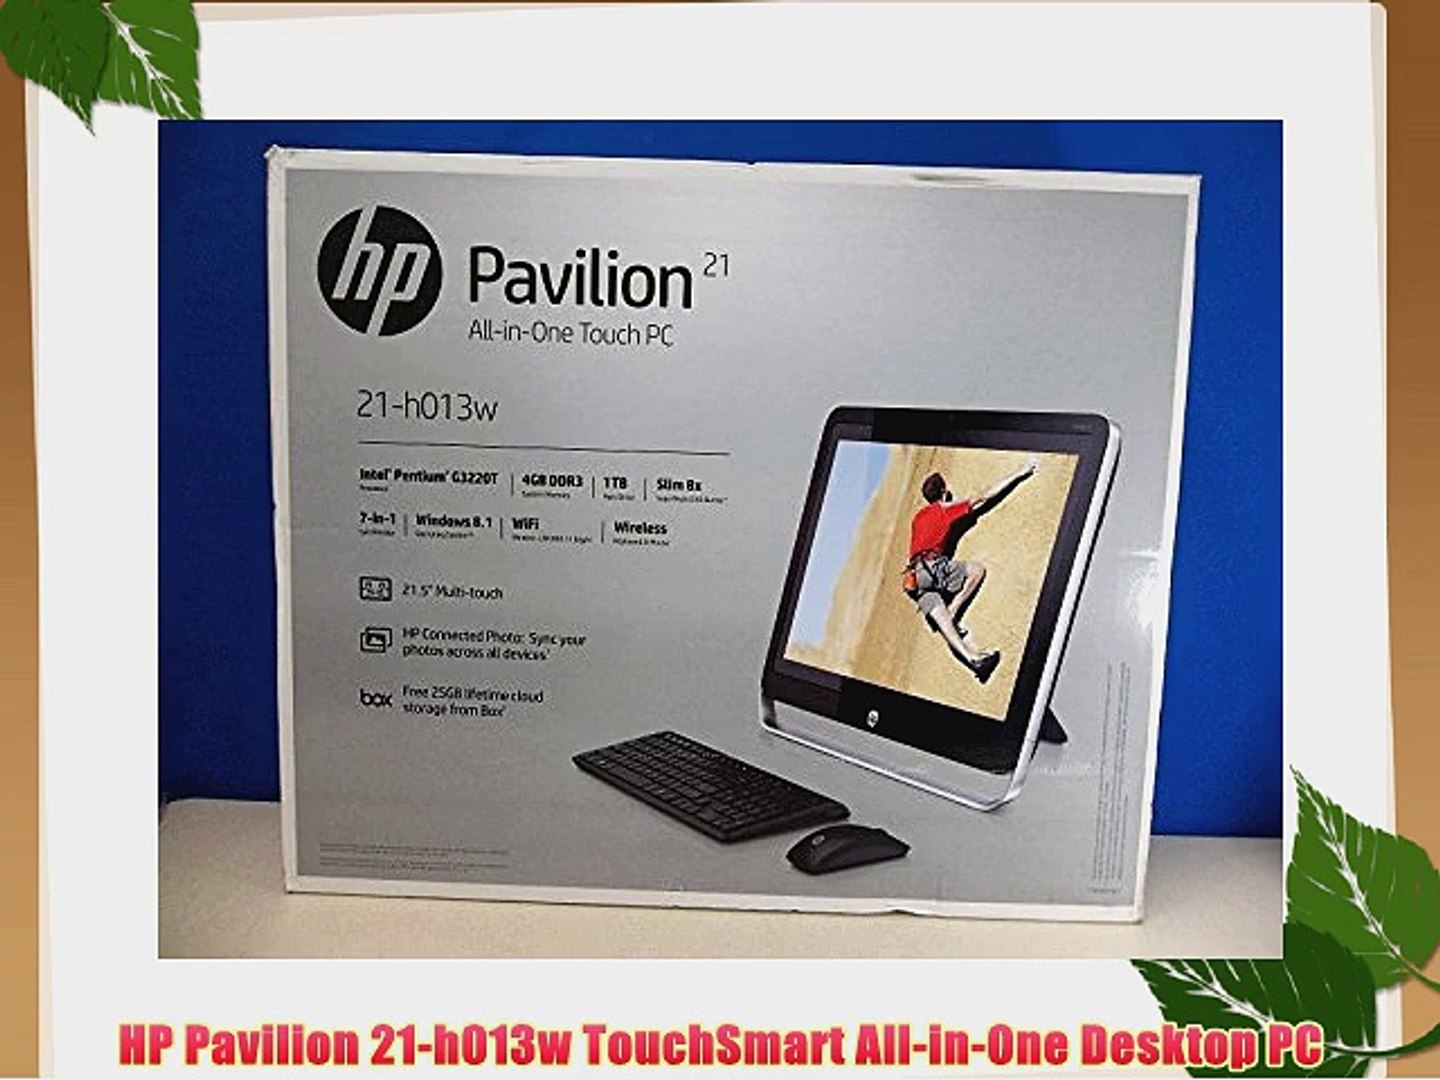 HP Pavilion 21-h013w TouchSmart All-in-One Desktop PC - video Dailymotion